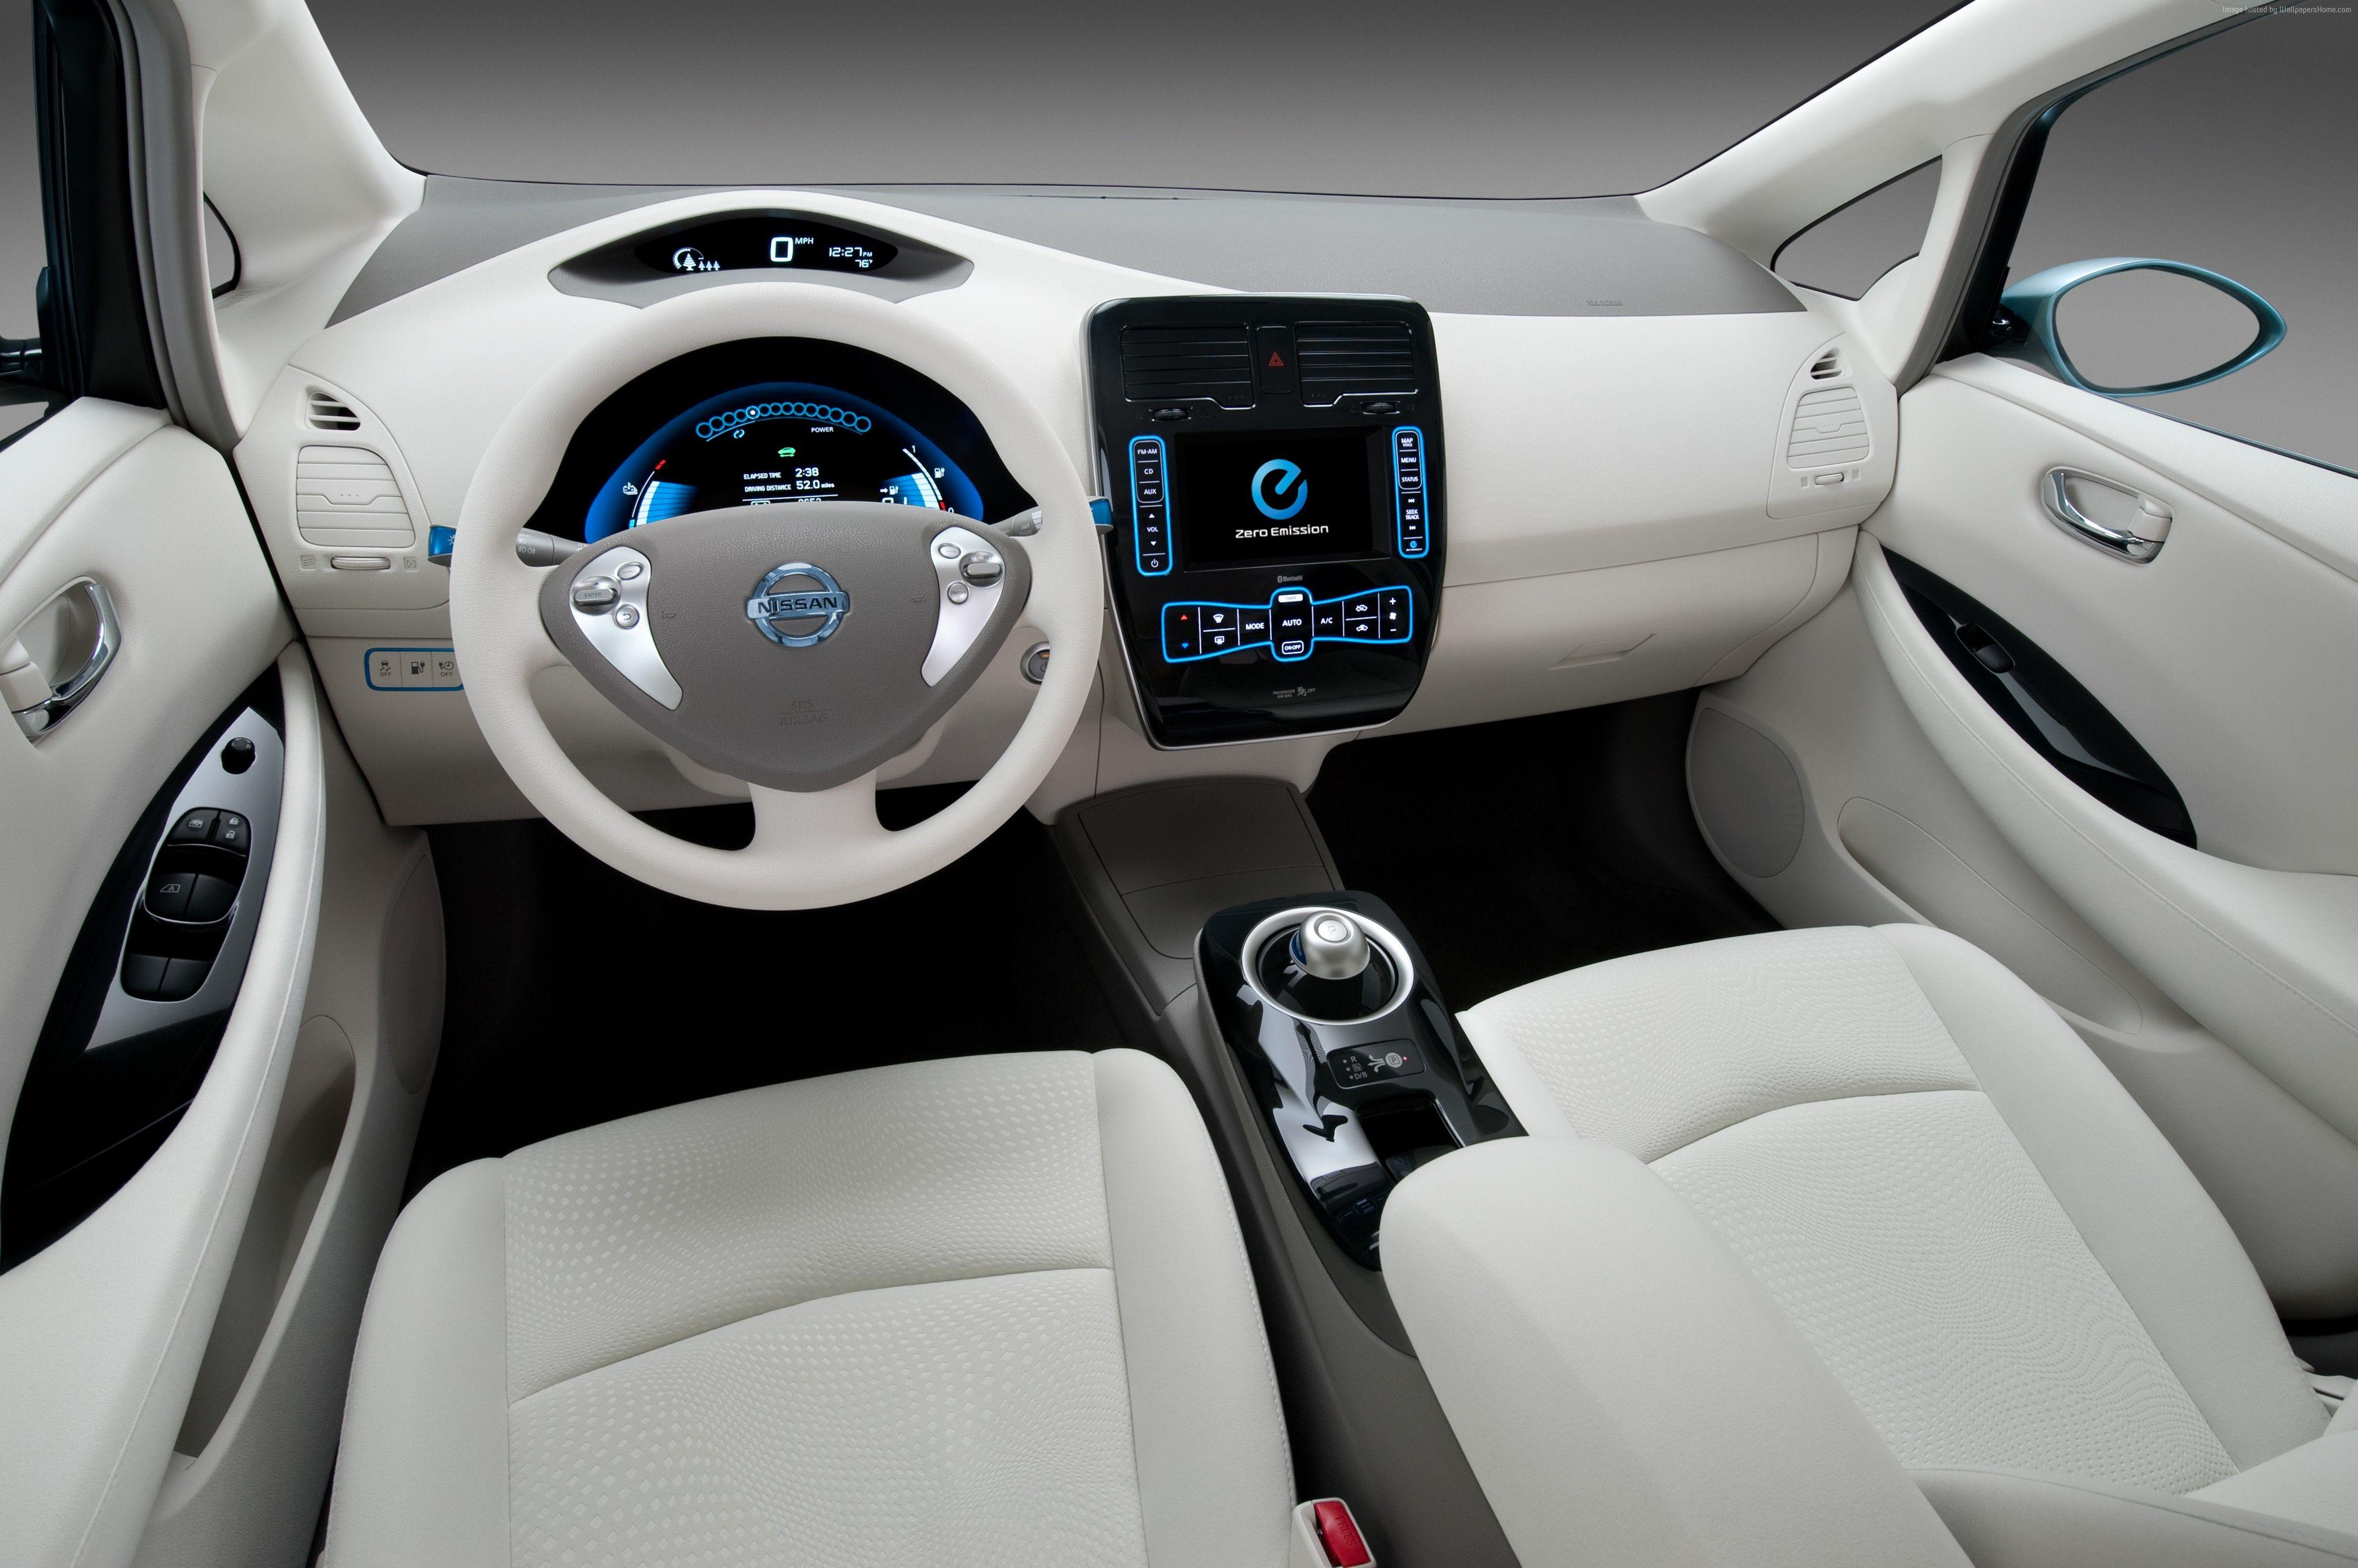 Wallpaper Nissan LEAF, electric cars, Nissan, interior, city cars